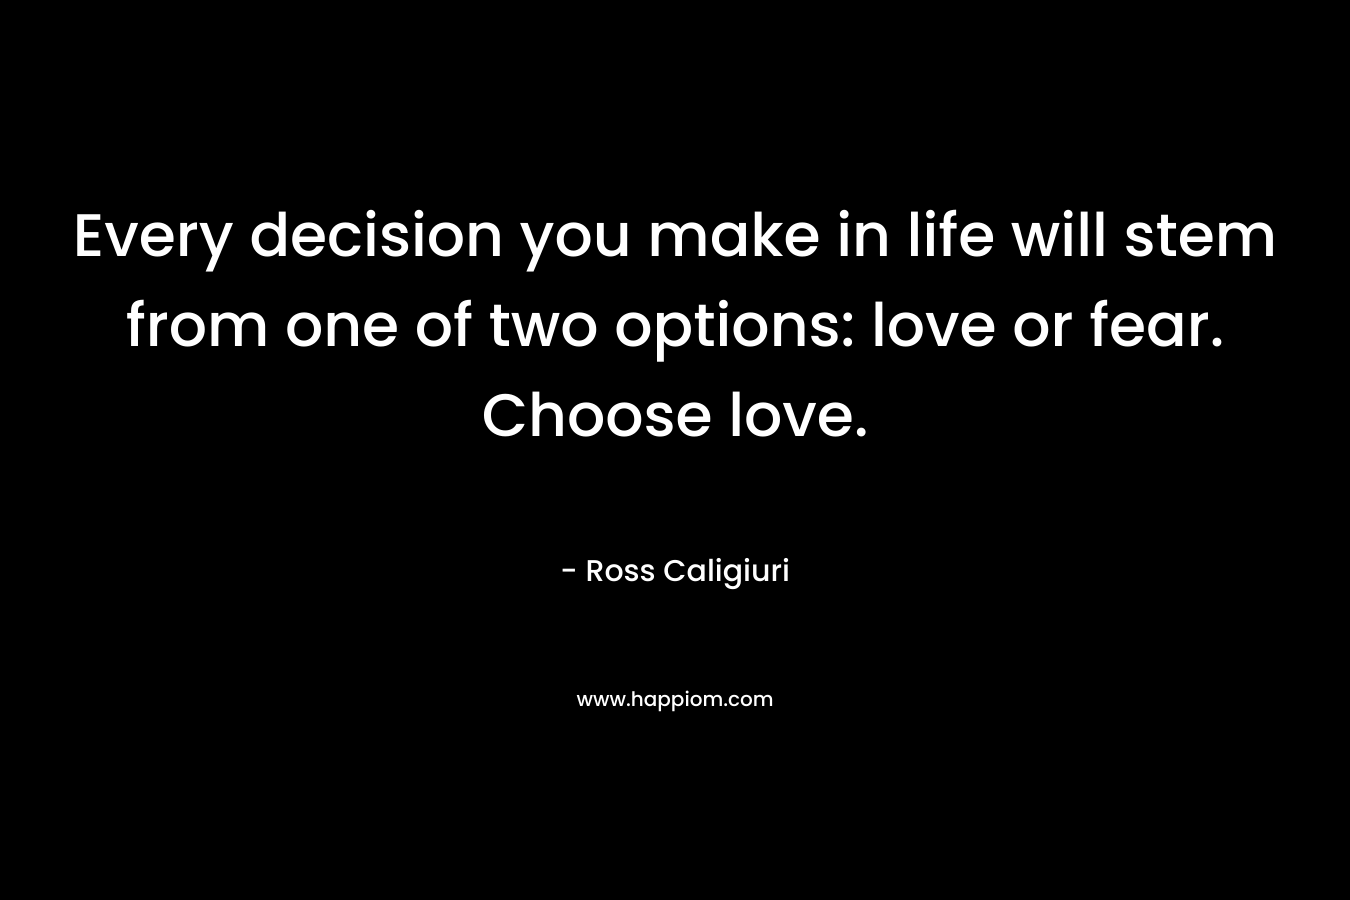 Every decision you make in life will stem from one of two options: love or fear. Choose love.